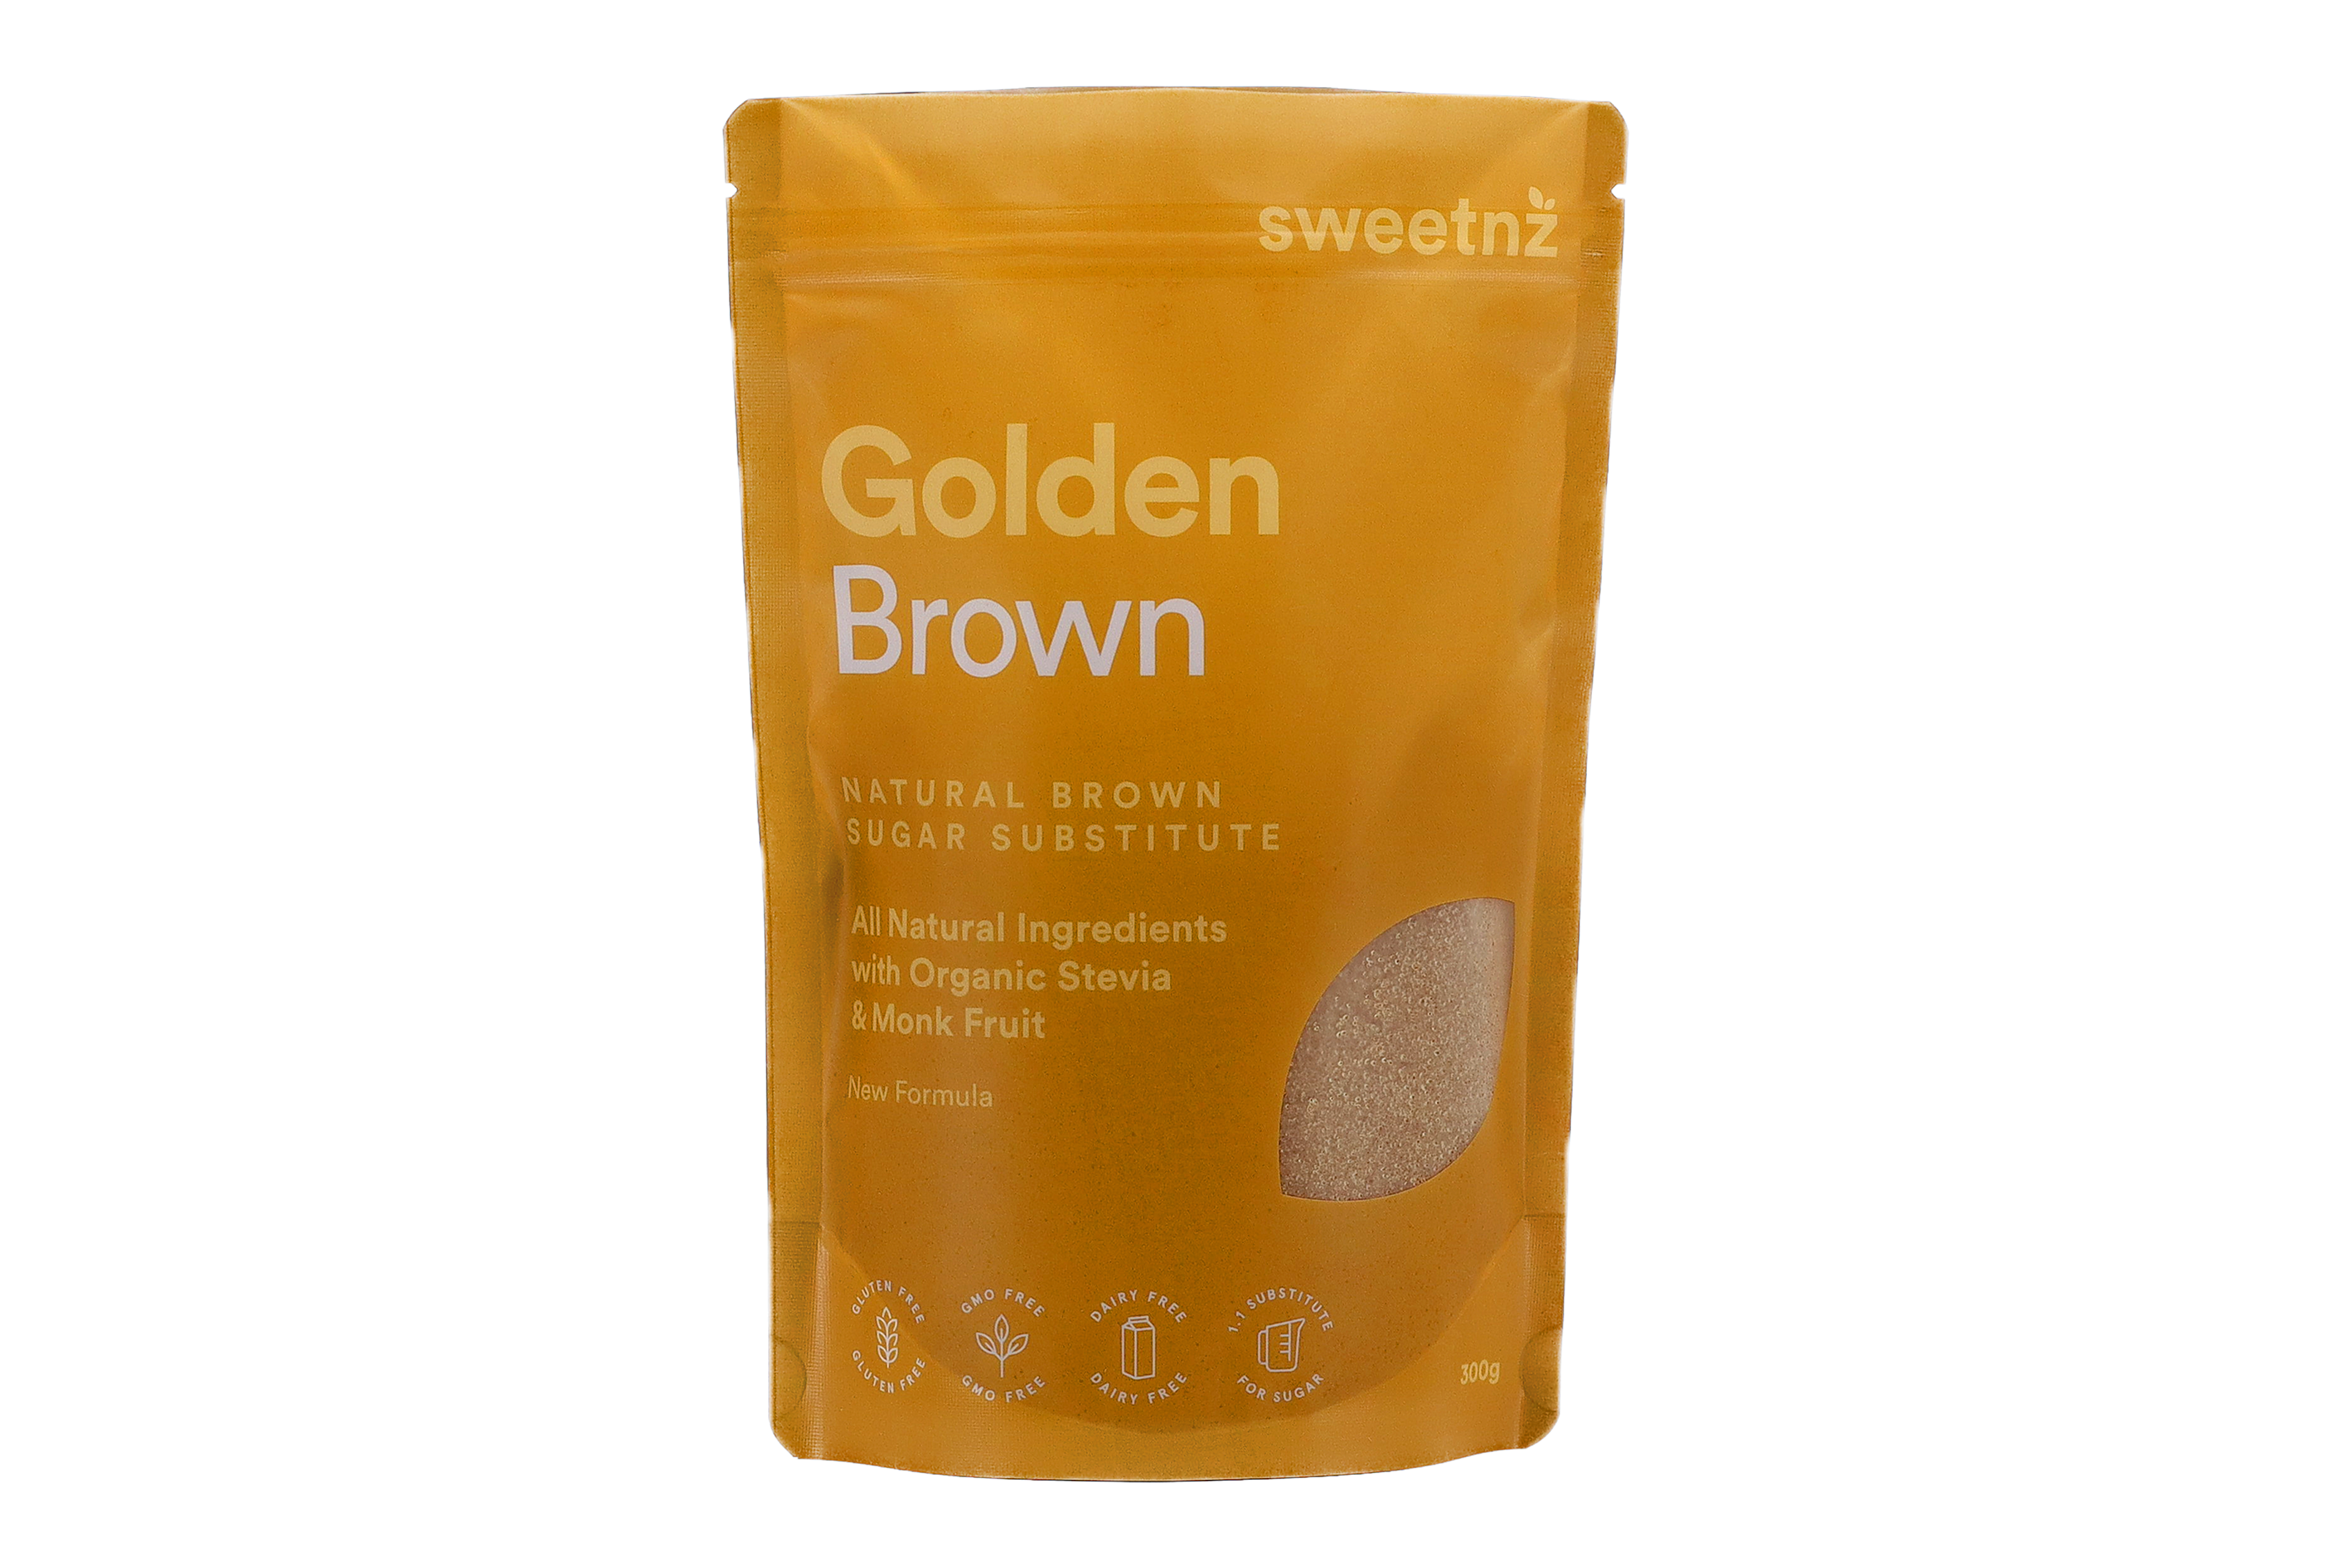 300g Golden Brown front of package - available from June 1 (approximately) with an all new formula that includes organic Monk Fruit extract, organic Stevia extract, molasses and a touch of natural caramel flavouring.